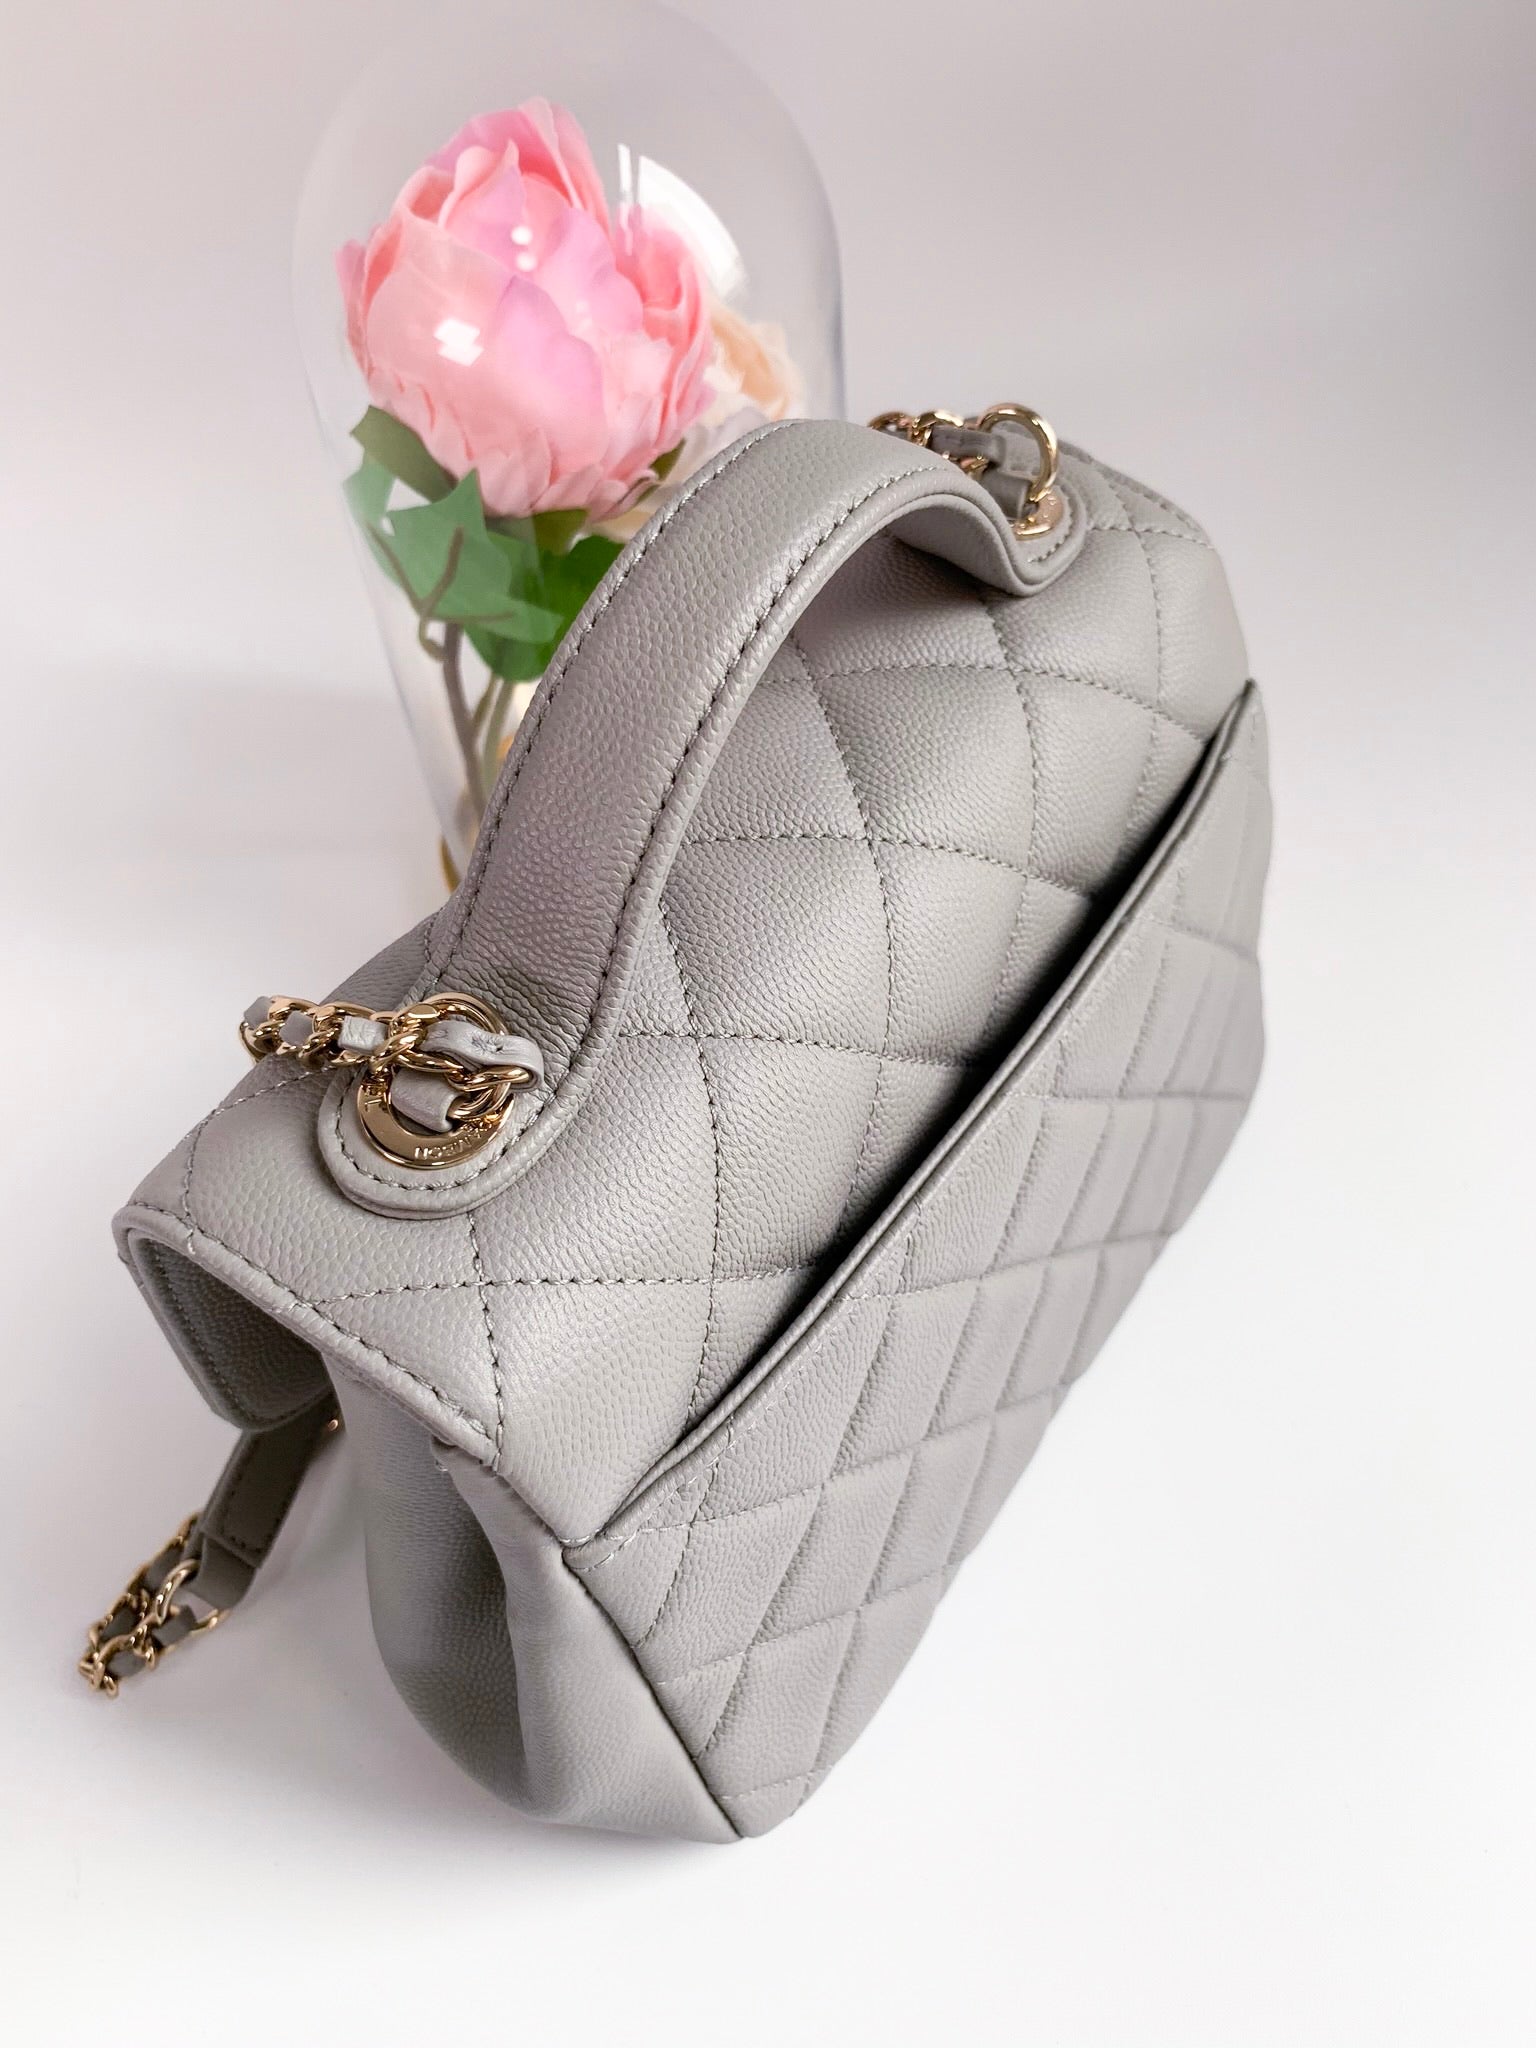 CHANEL Caviar Quilted Mini Business Affinity Flap Light Pink